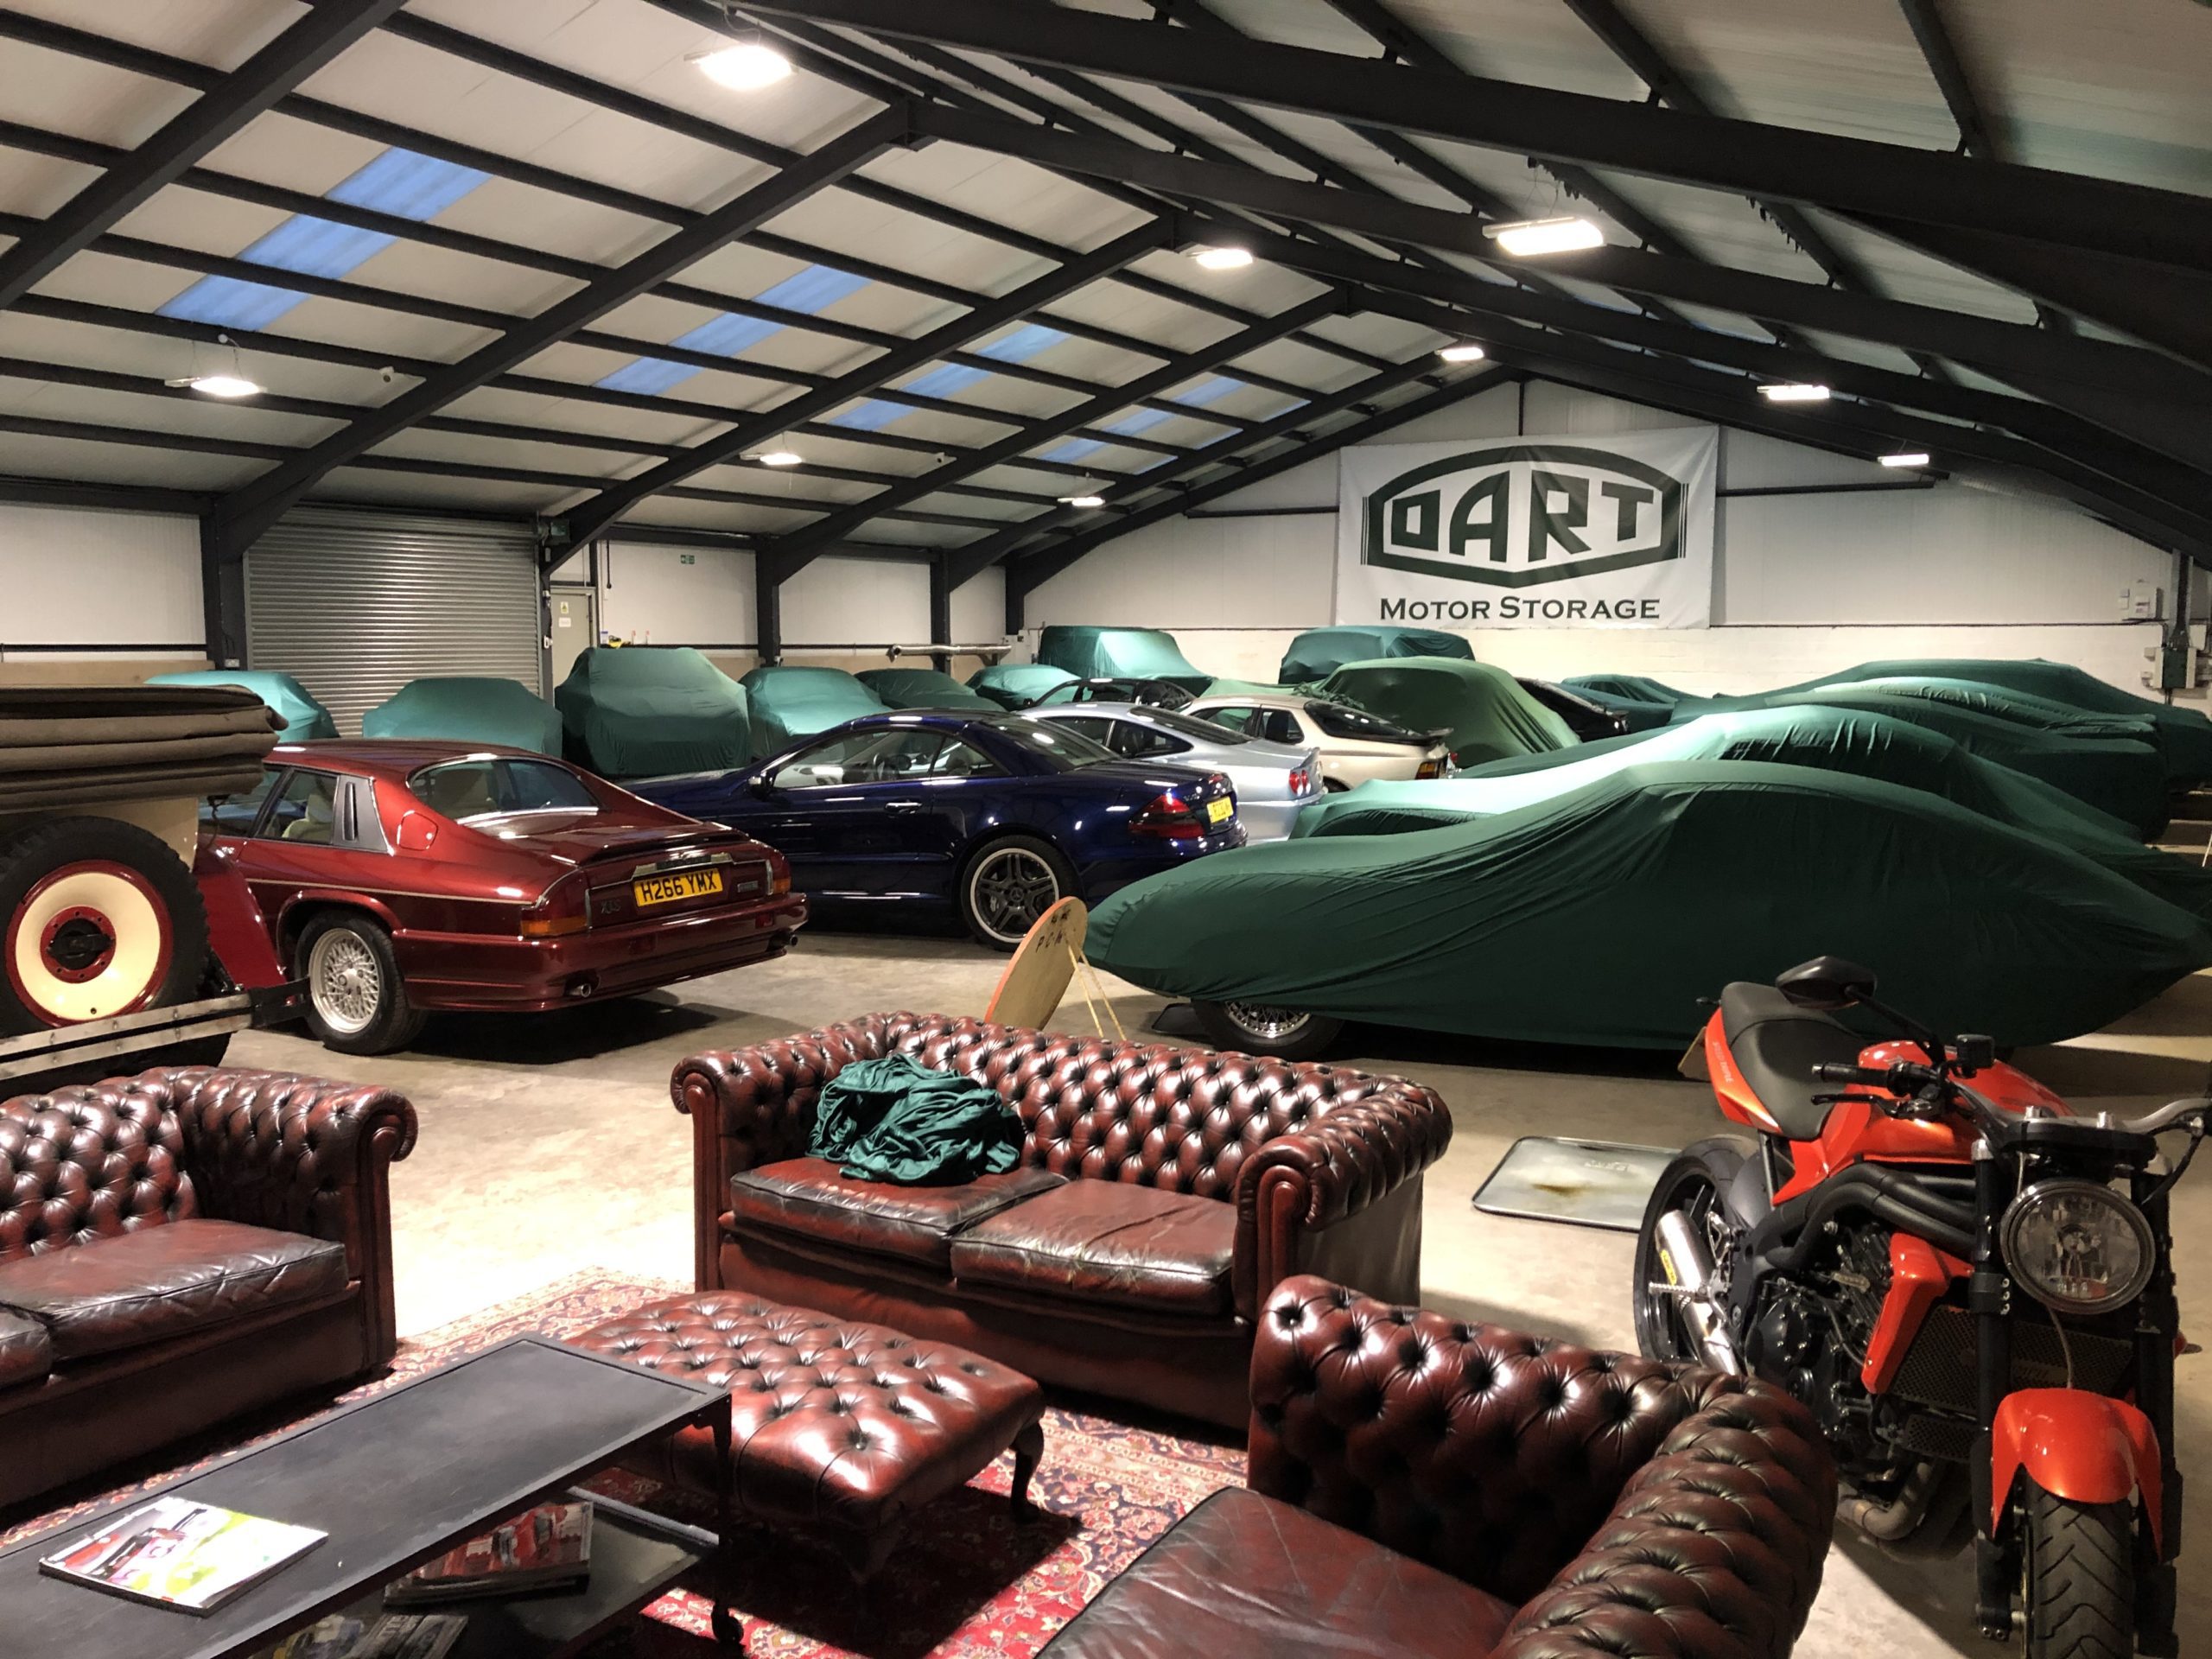 Large industrial unit containing classic cars